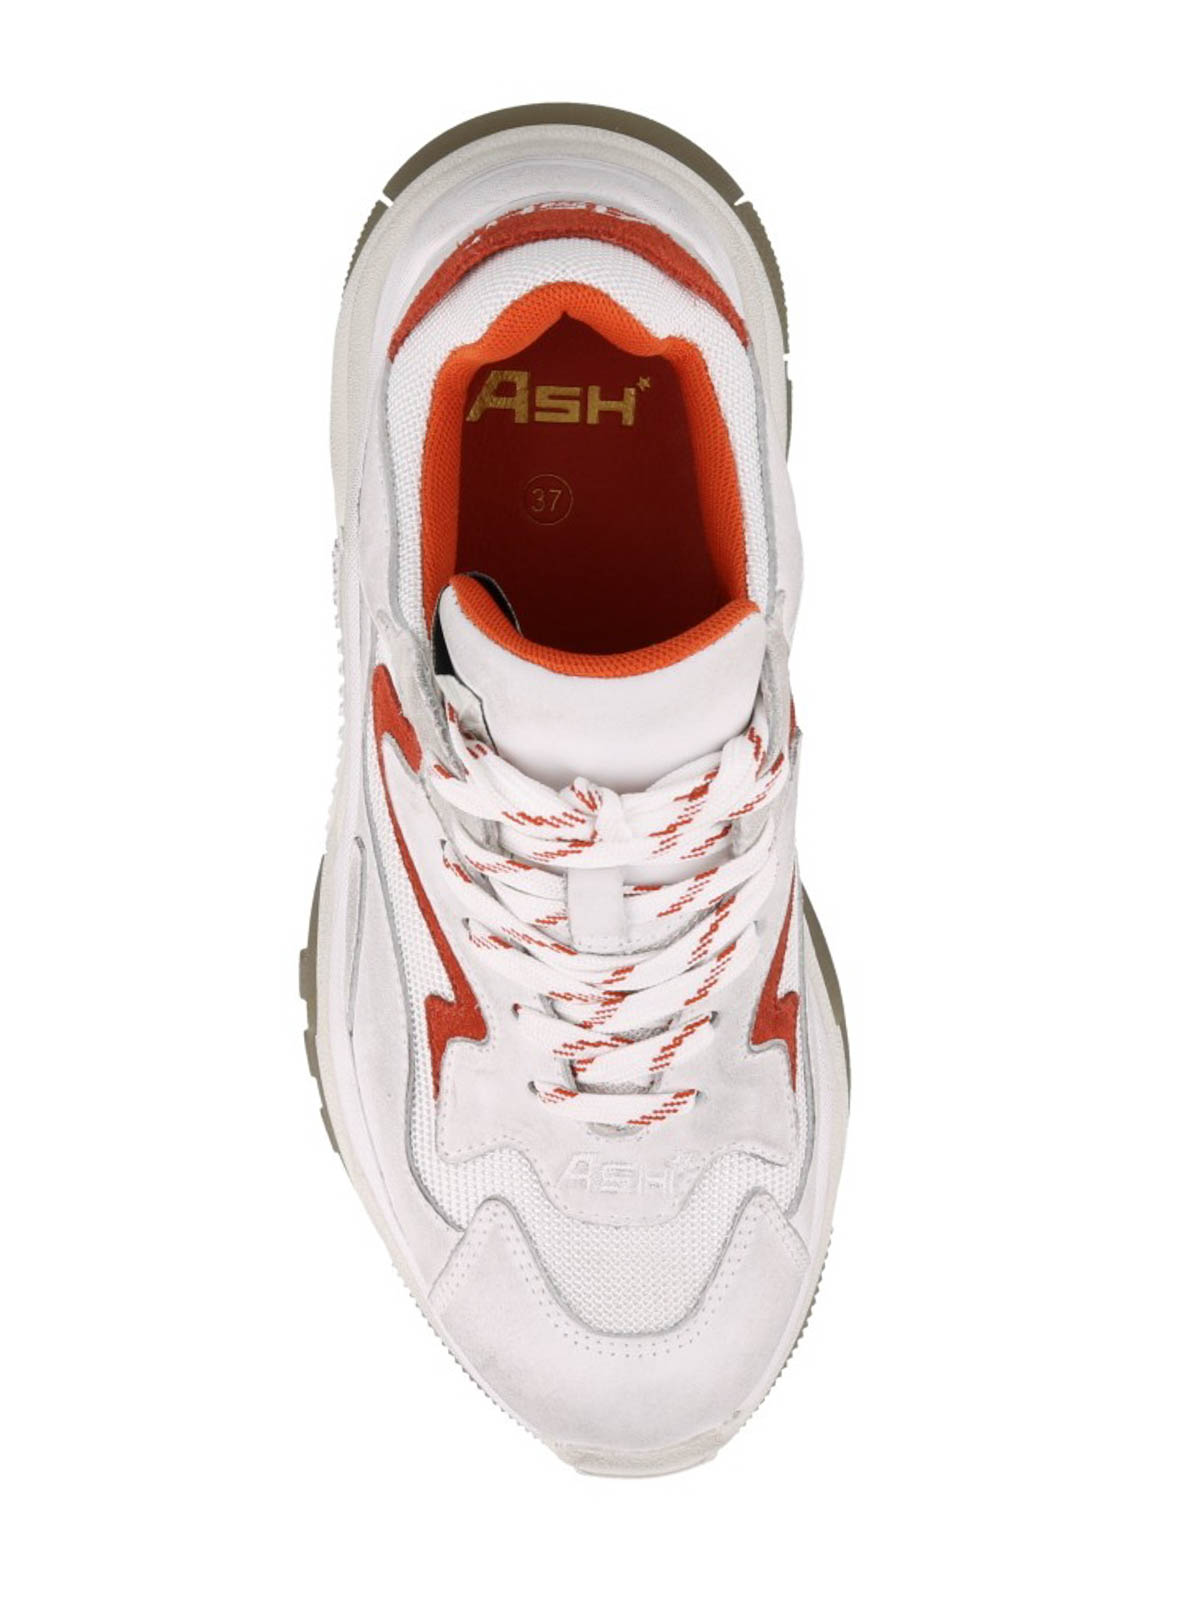 Shop Ash Addict Sneakers In White And Red